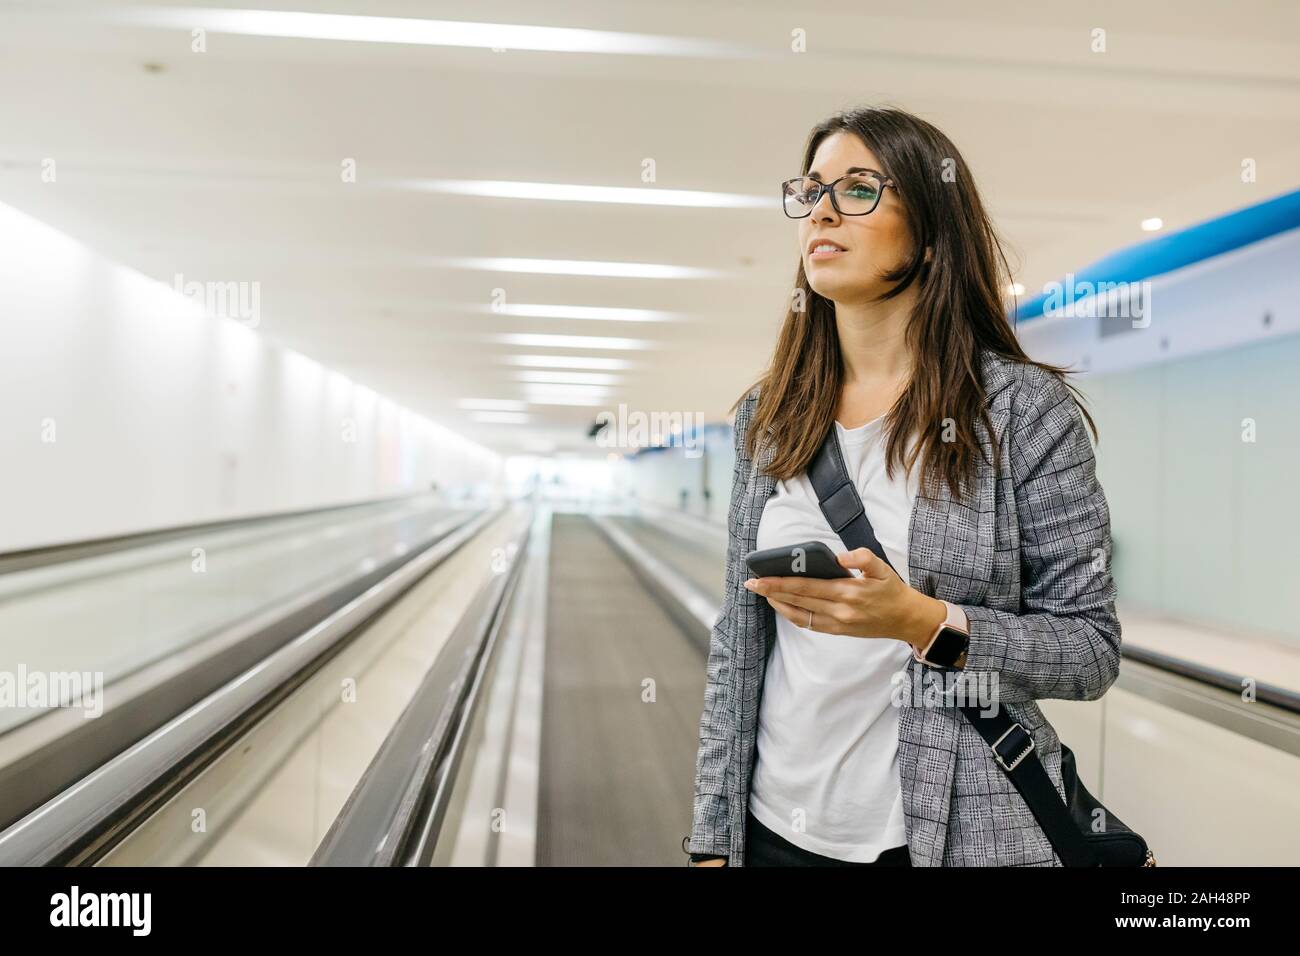 Young businesswoman using smartphone on moving walkway Stock Photo